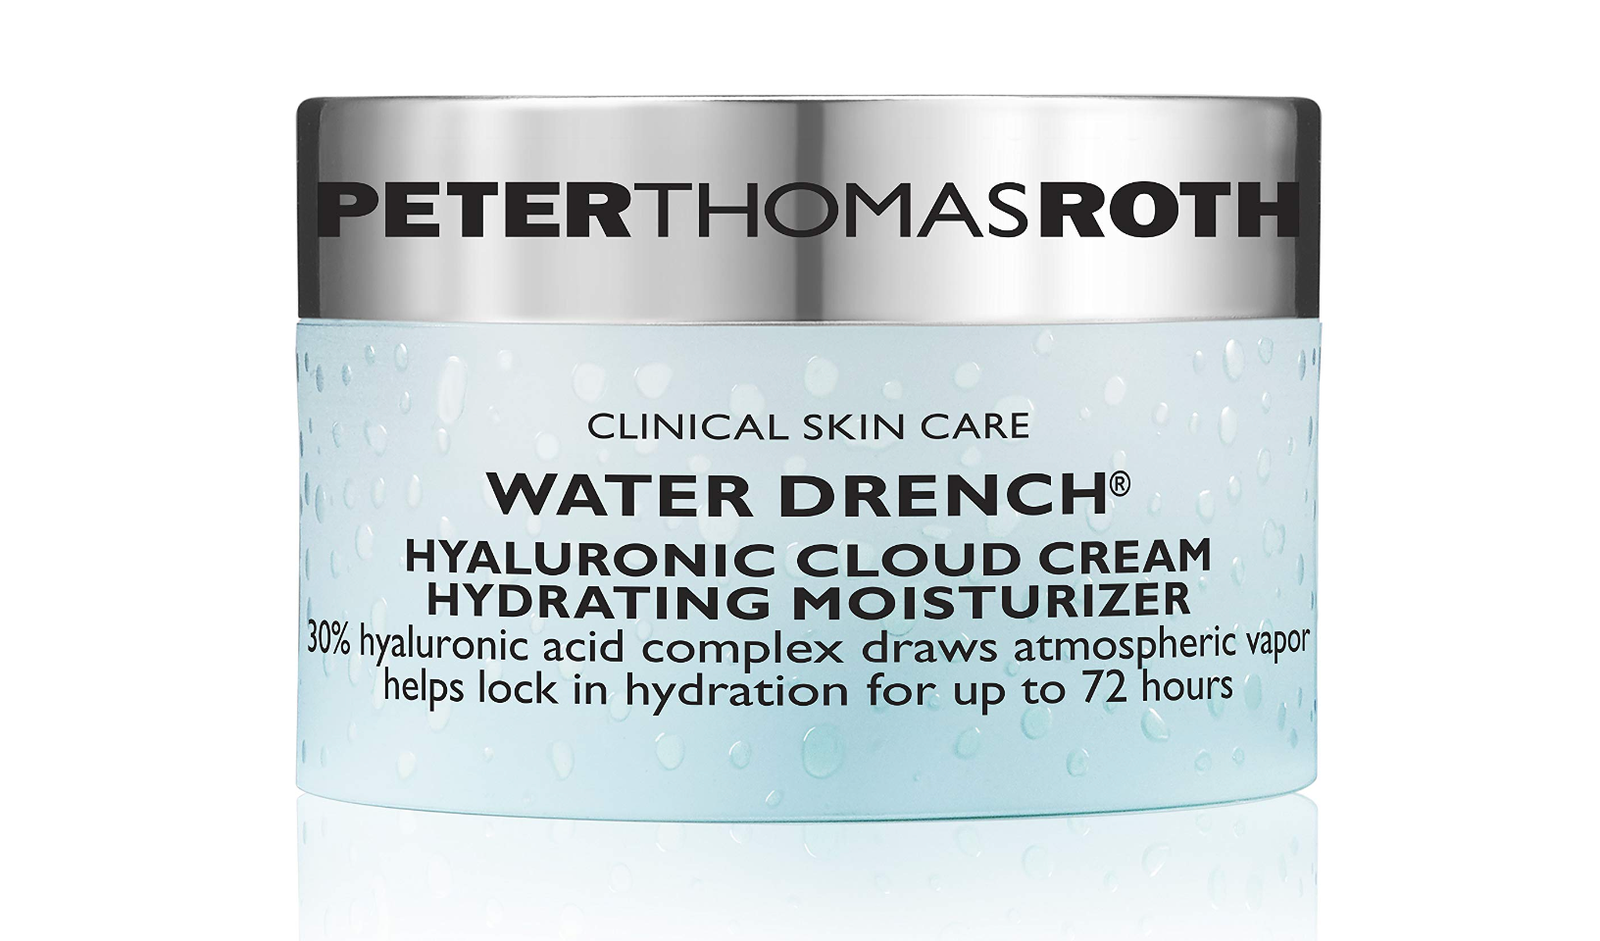 Moisturizers with Hyaluronic Acid